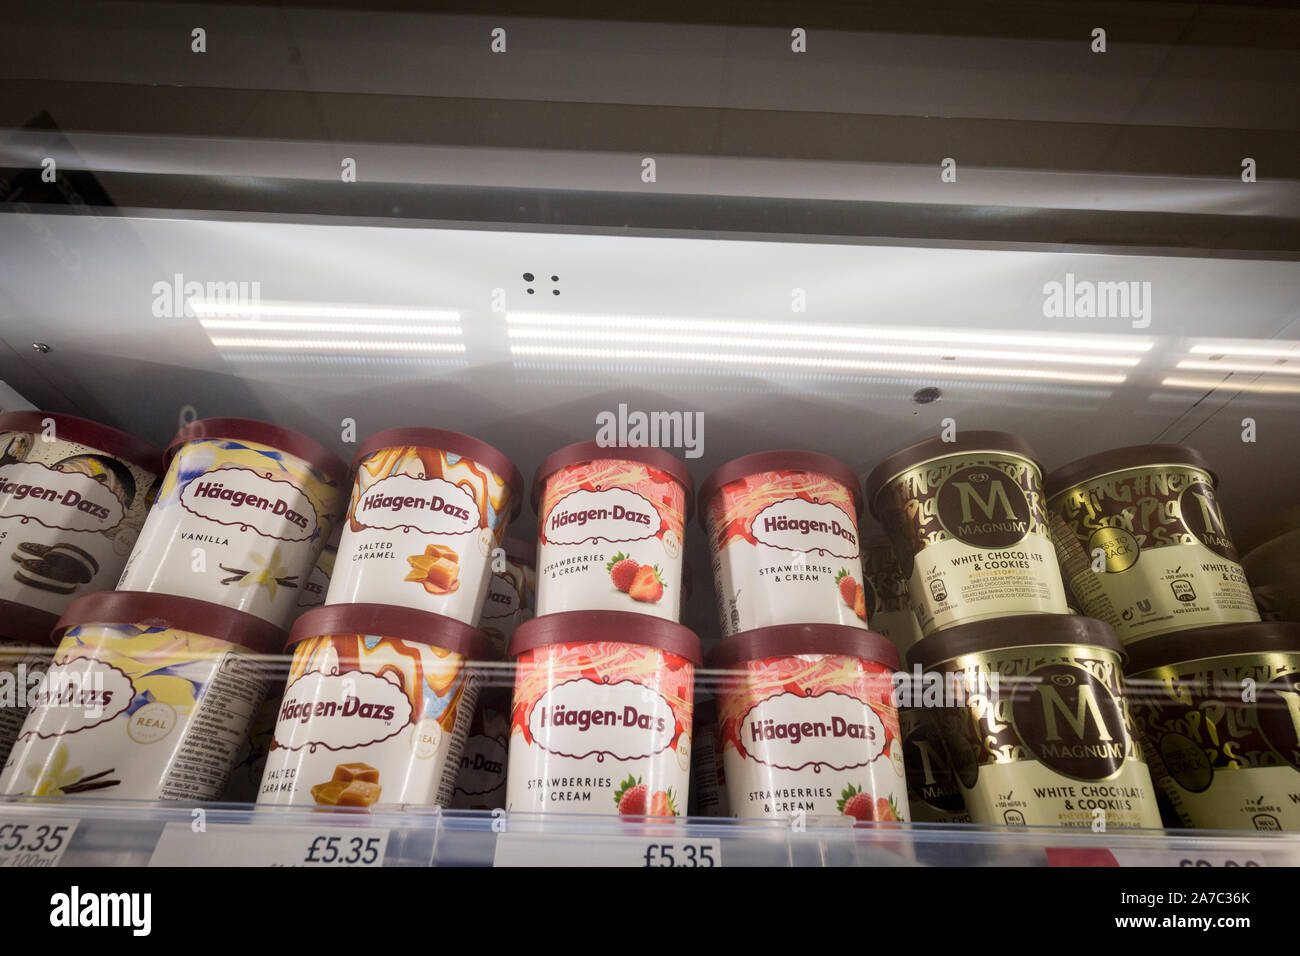 Pictures at a Co-Op food store. Haagen-Dazs ice cream. Stock Photo